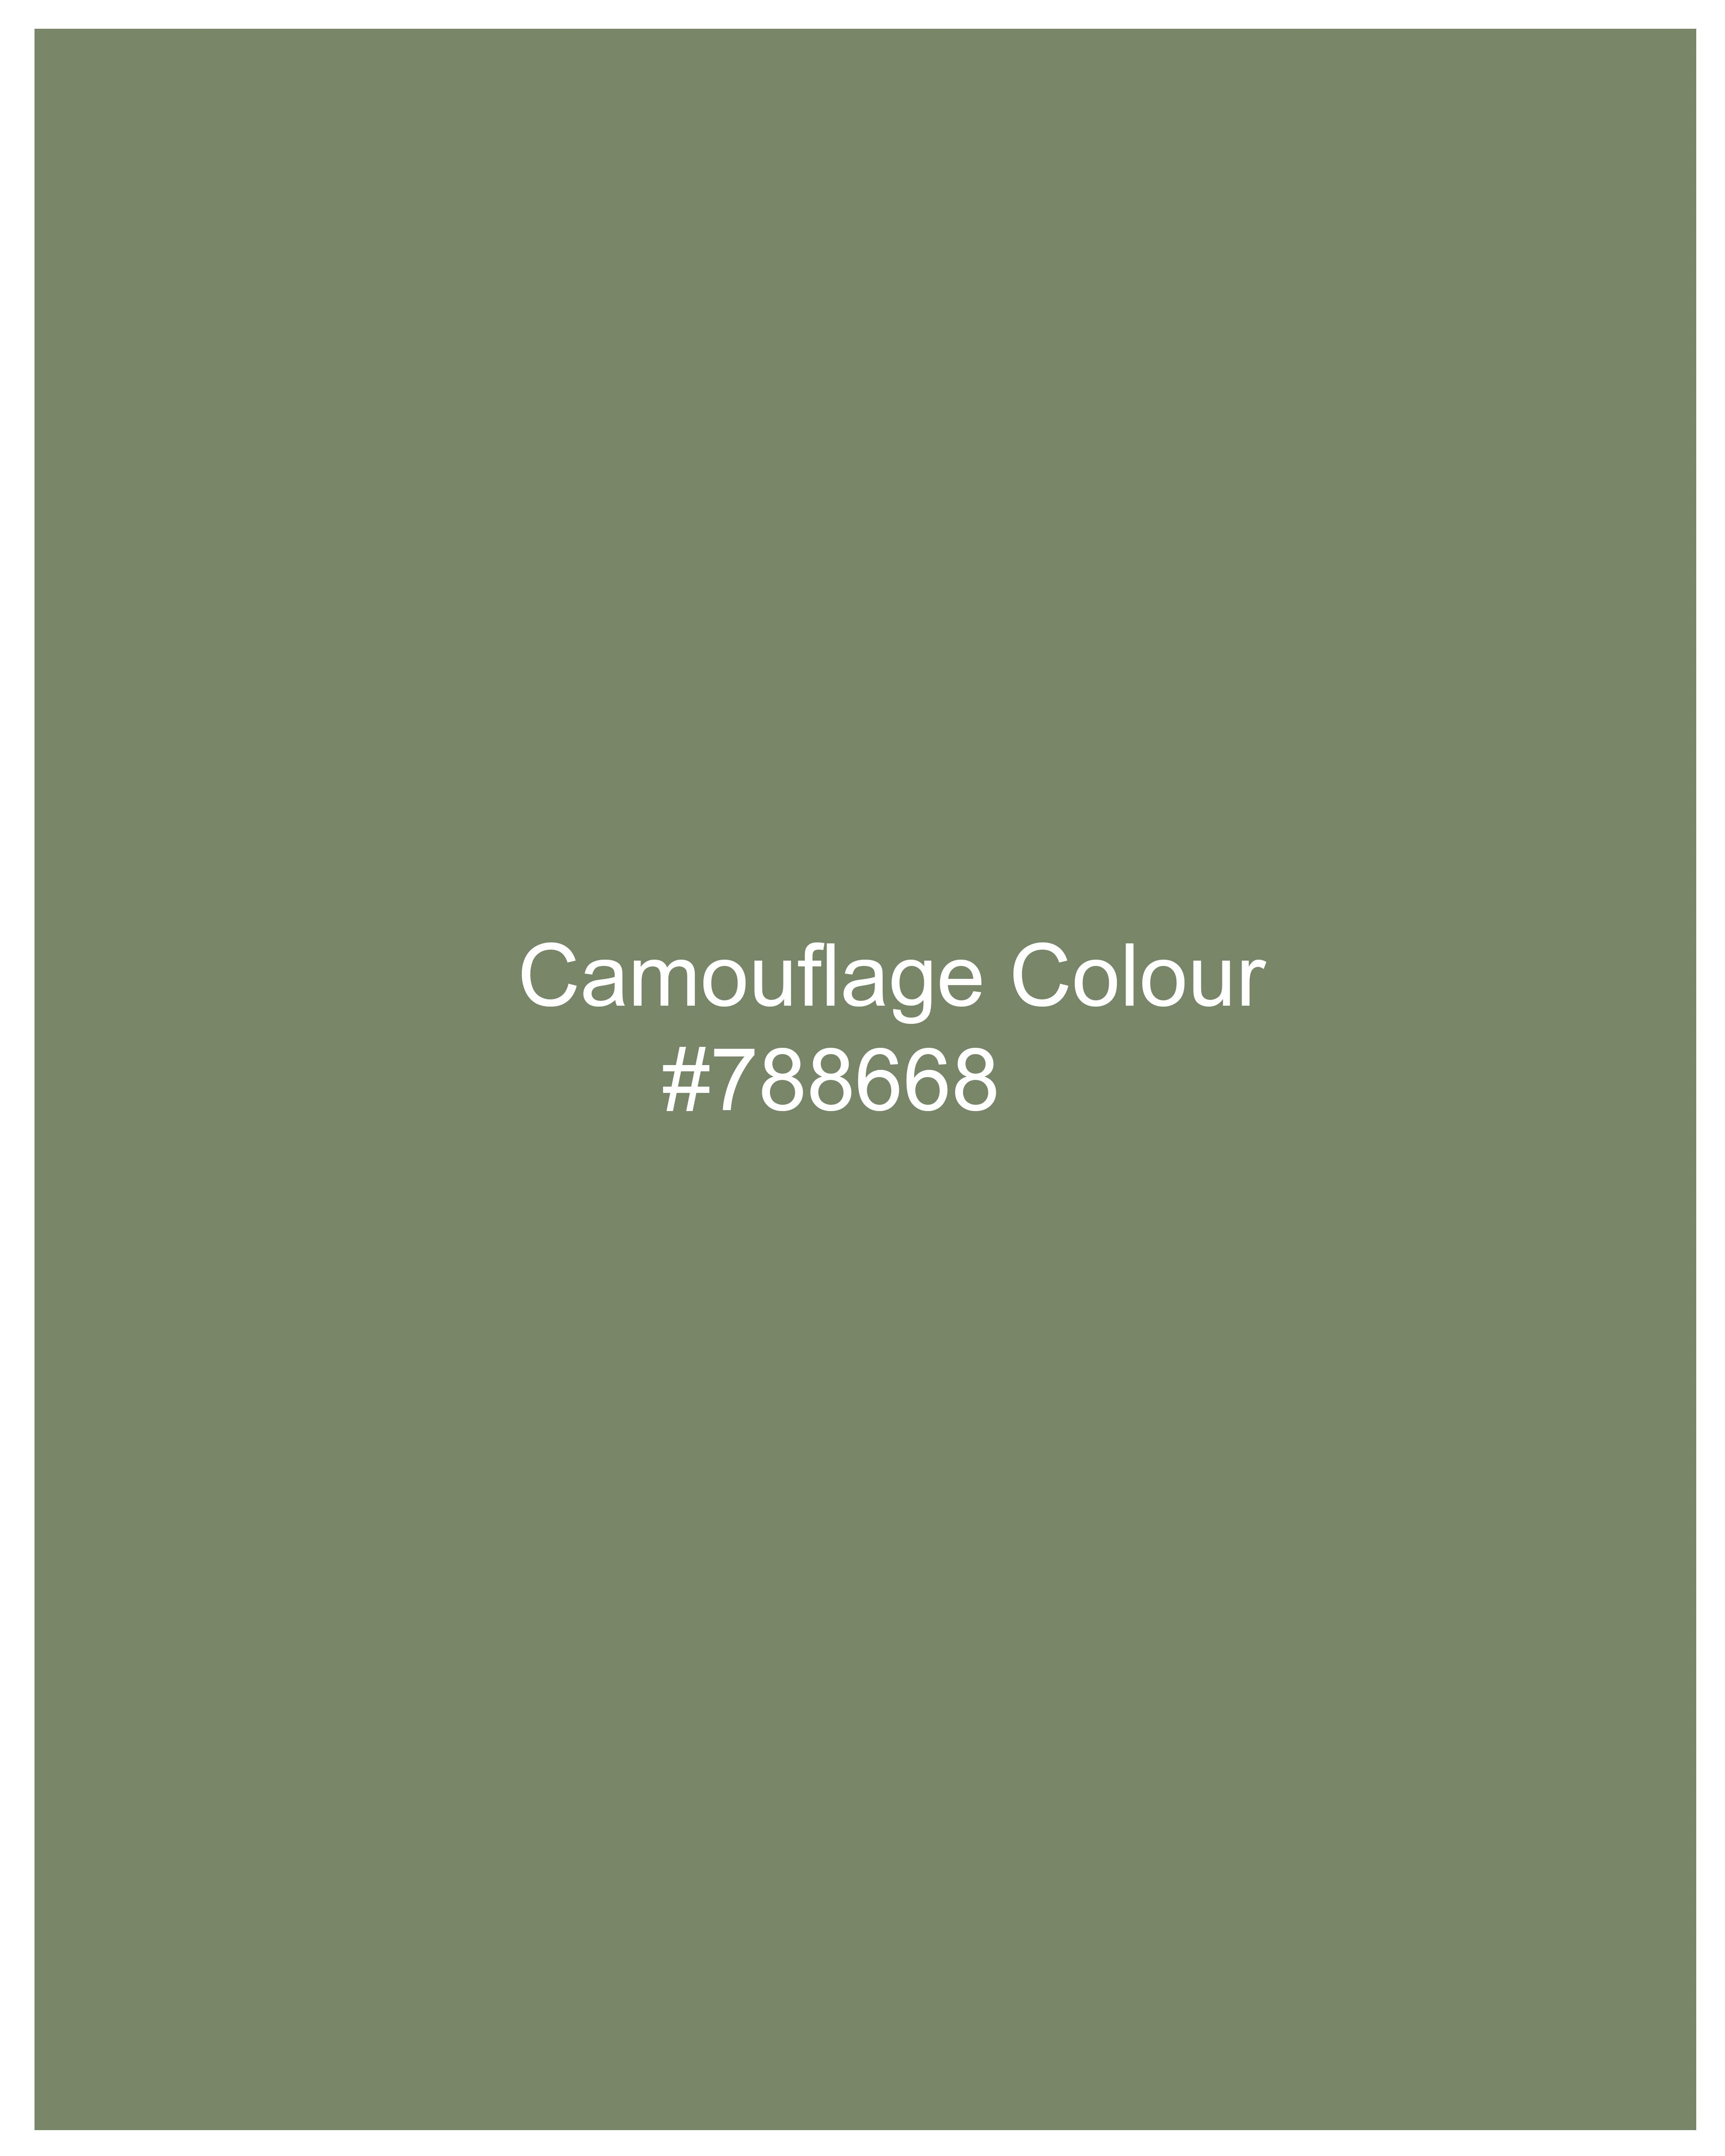 Camouflage Green Royal Oxford Button-Down Shirt 9595-BD-38,9595-BD-H-38,9595-BD-39,9595-BD-H-39,9595-BD-40,9595-BD-H-40,9595-BD-42,9595-BD-H-42,9595-BD-44,9595-BD-H-44,9595-BD-46,9595-BD-H-46,9595-BD-48,9595-BD-H-48,9595-BD-50,9595-BD-H-50,9595-BD-52,9595-BD-H-52